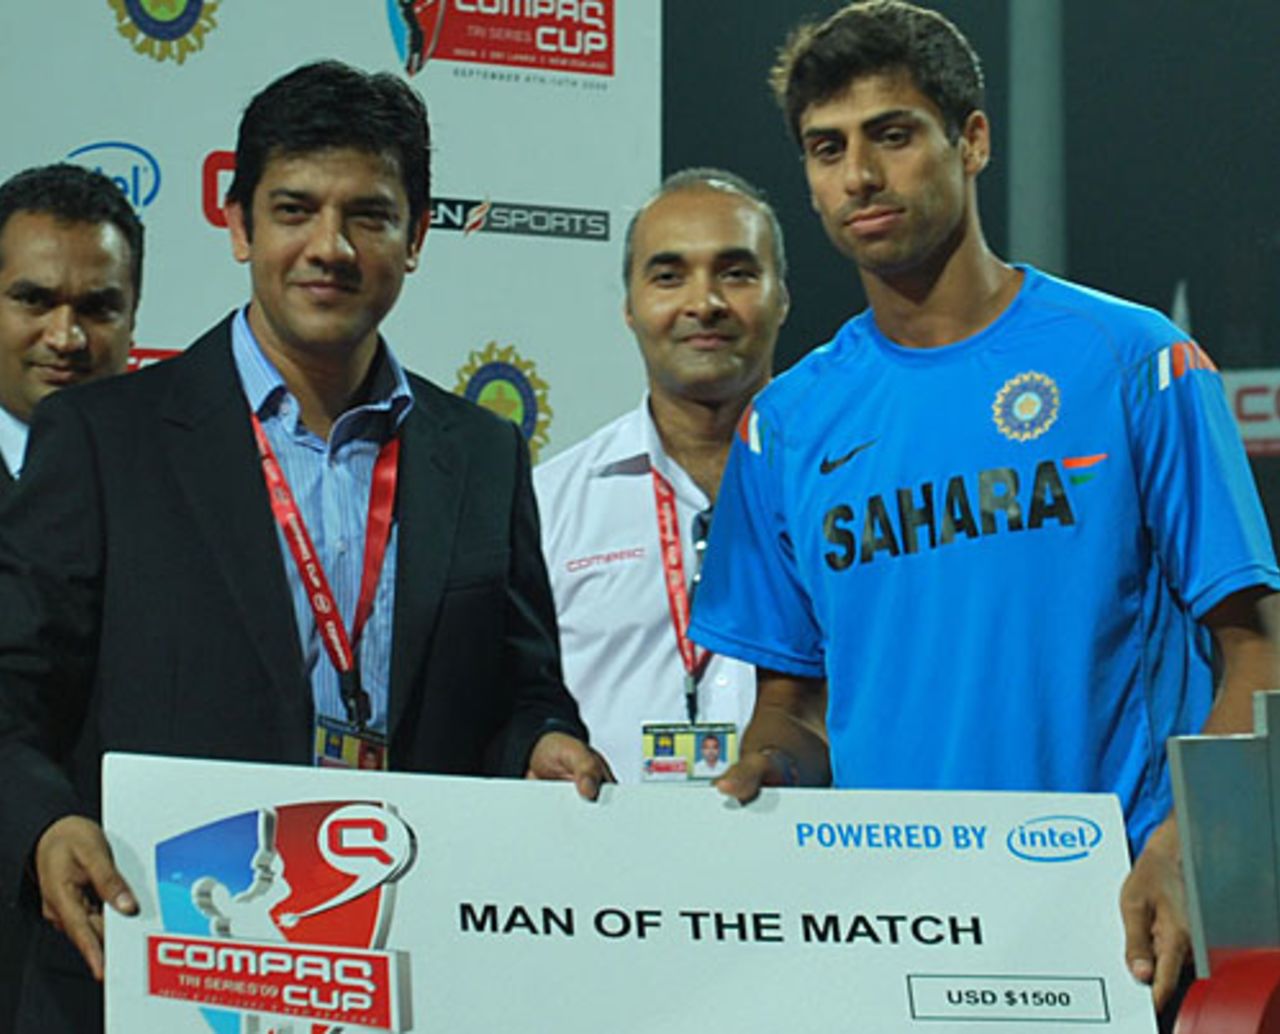 Ashish Nehra was the Man of the Match for his 3 for 24, India v New Zealand, 2nd match, Compaq Cup, Colombo, September 11, 2009